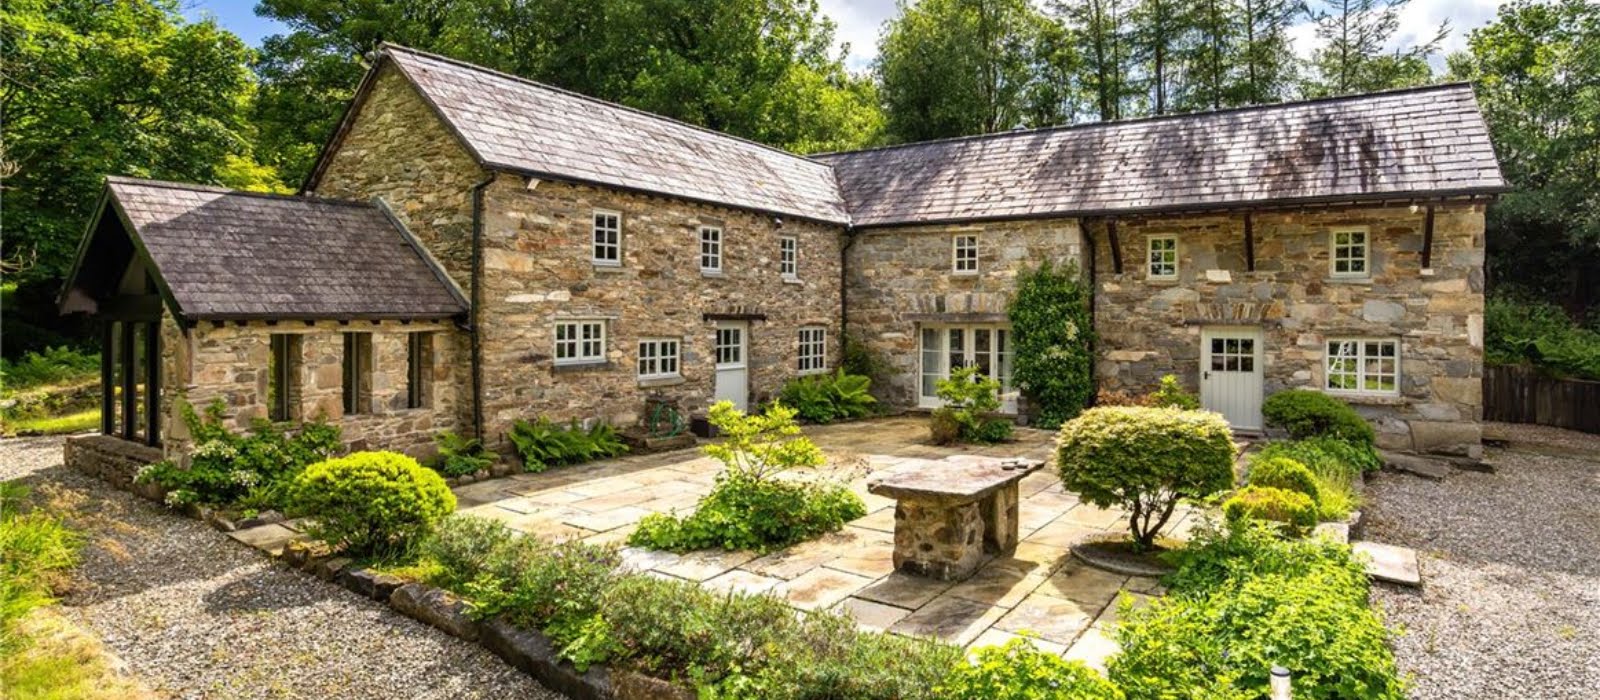 Take a tour of this restored Donegal millhouse, on the market for €525,000